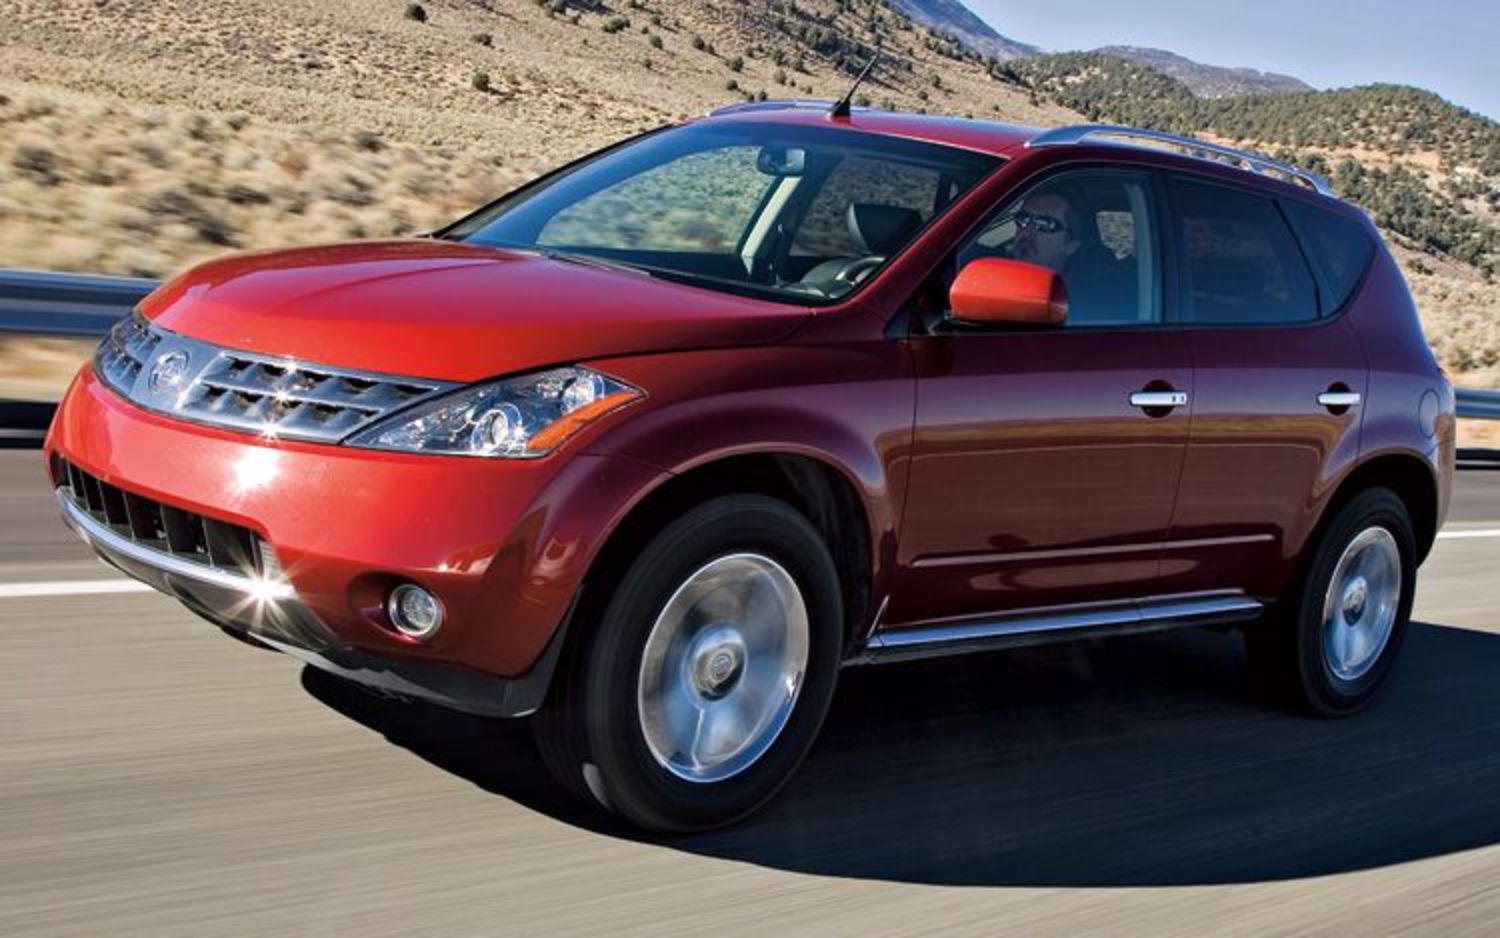 Nissan Murano SE. View Download Wallpaper. 750x469. Comments